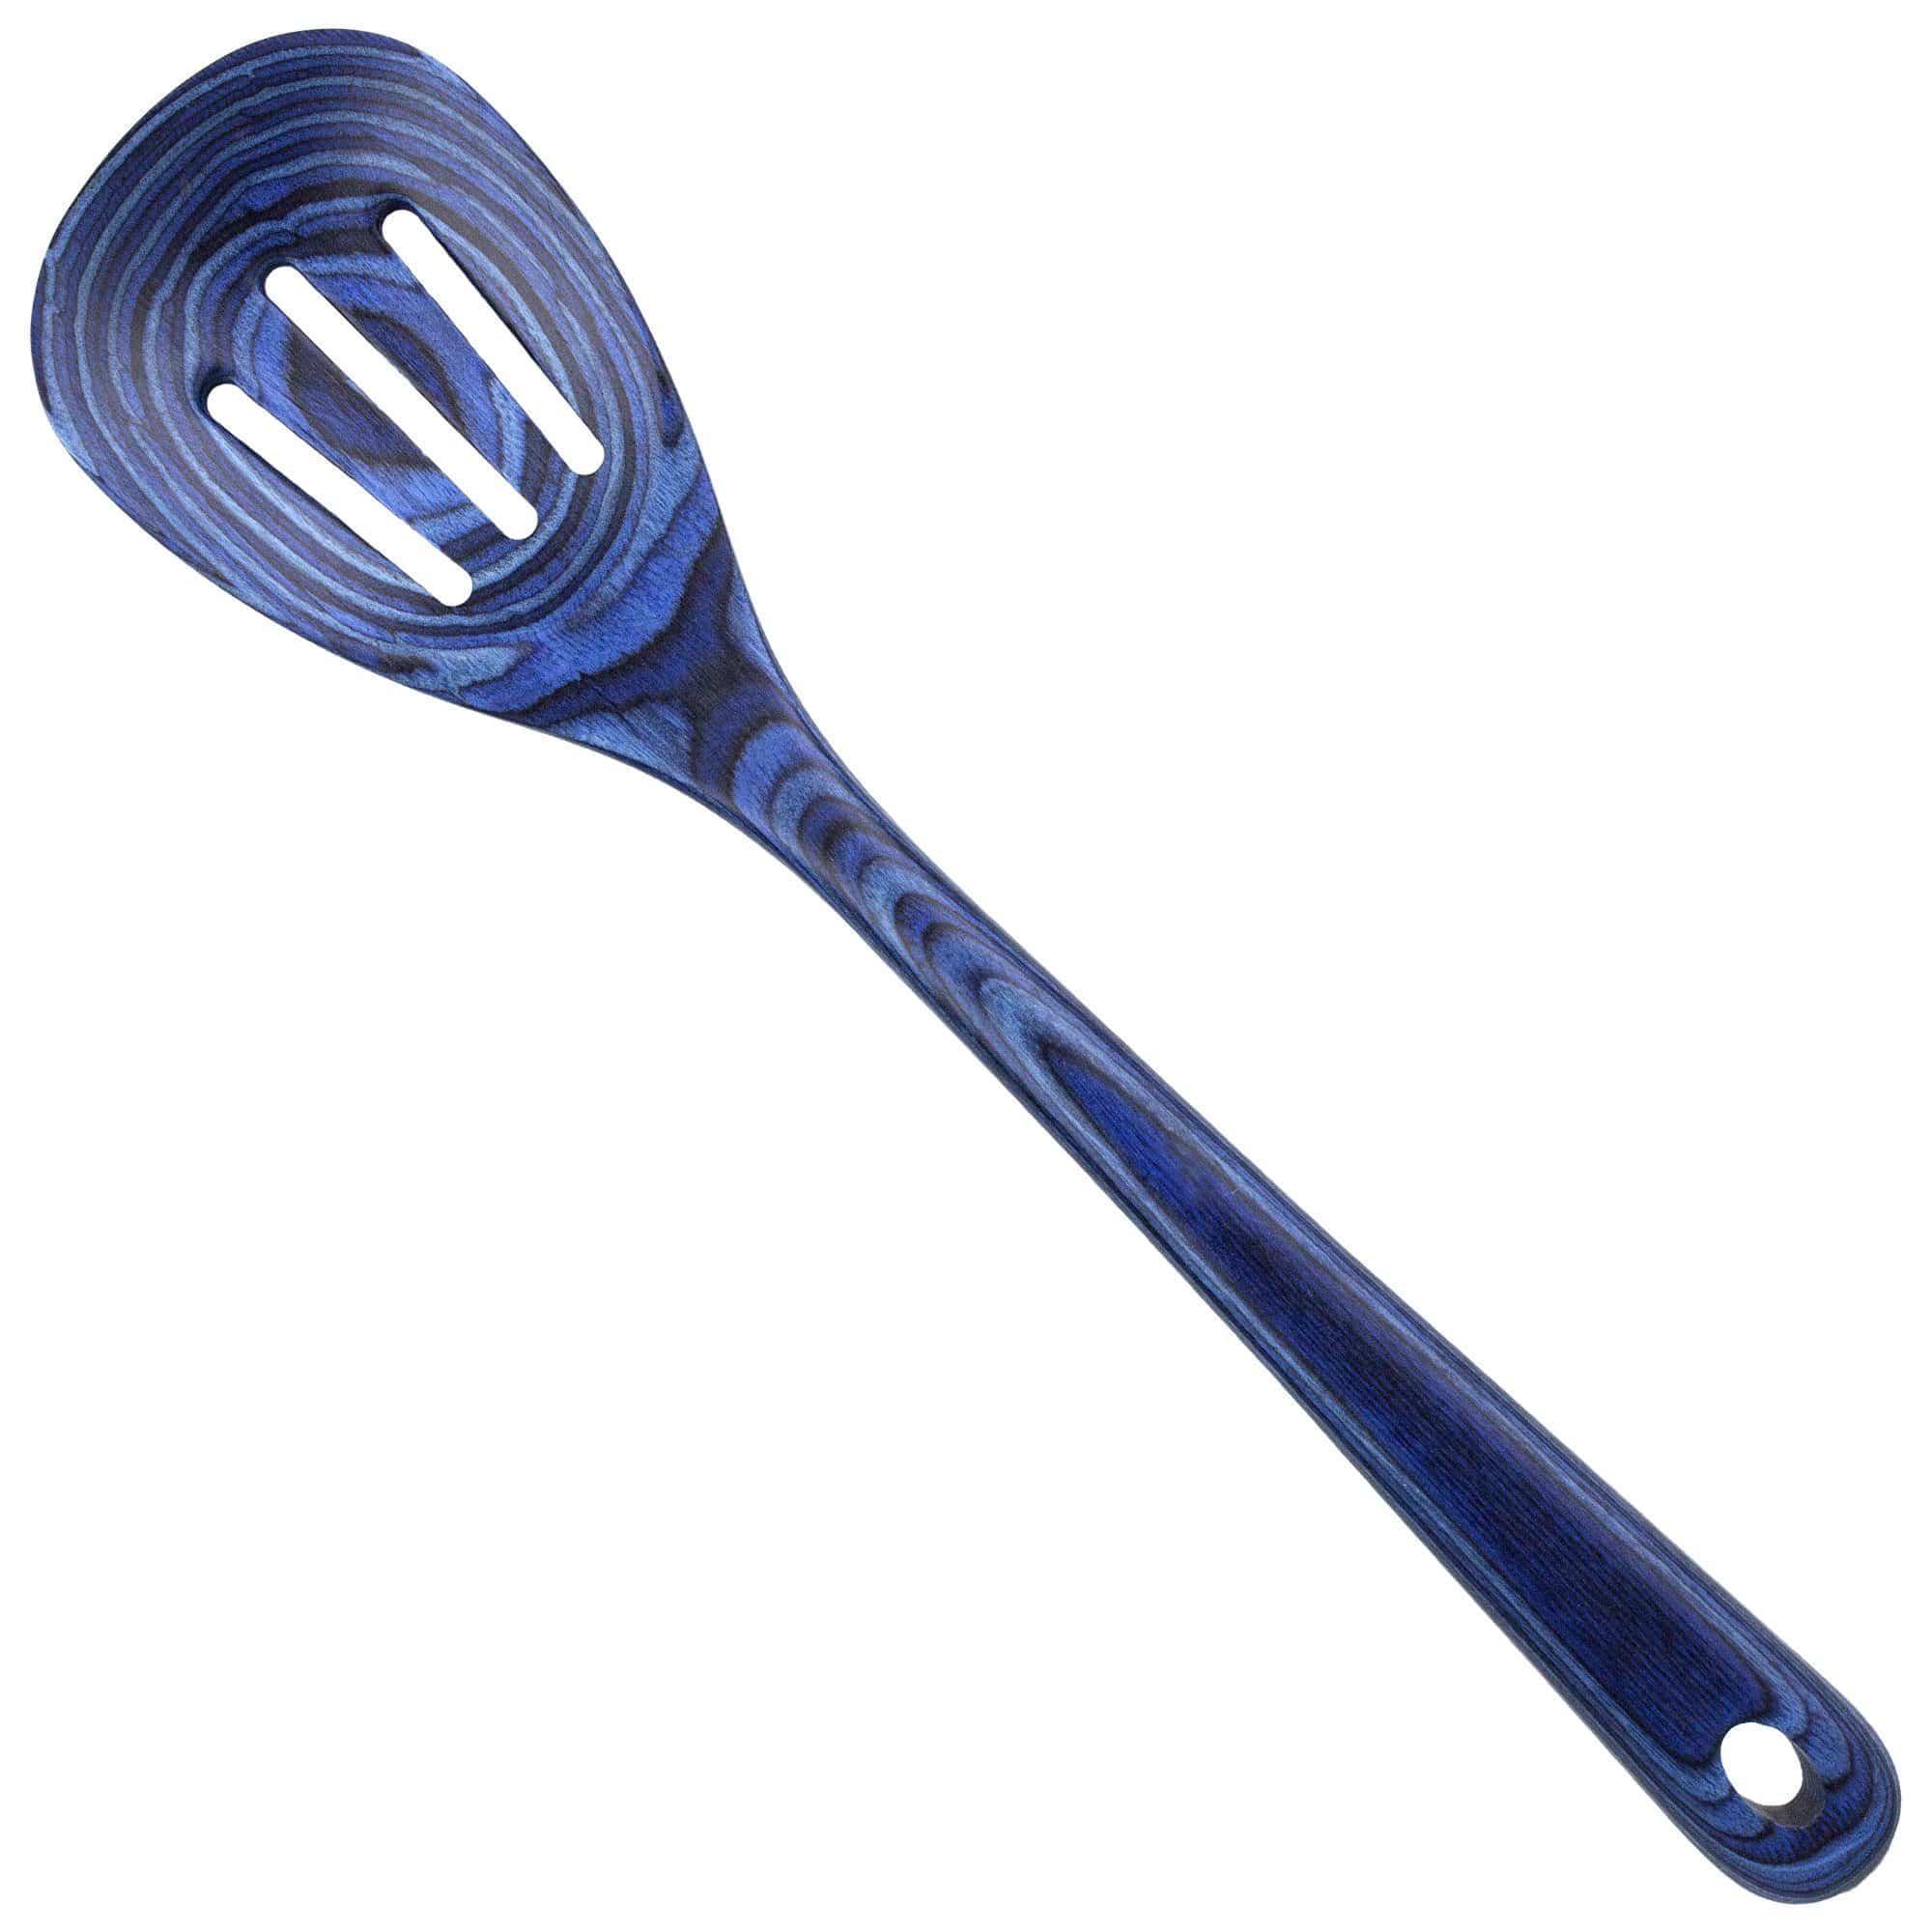 Totally Bamboo Baltique® Malta Collection Slotted Spoon